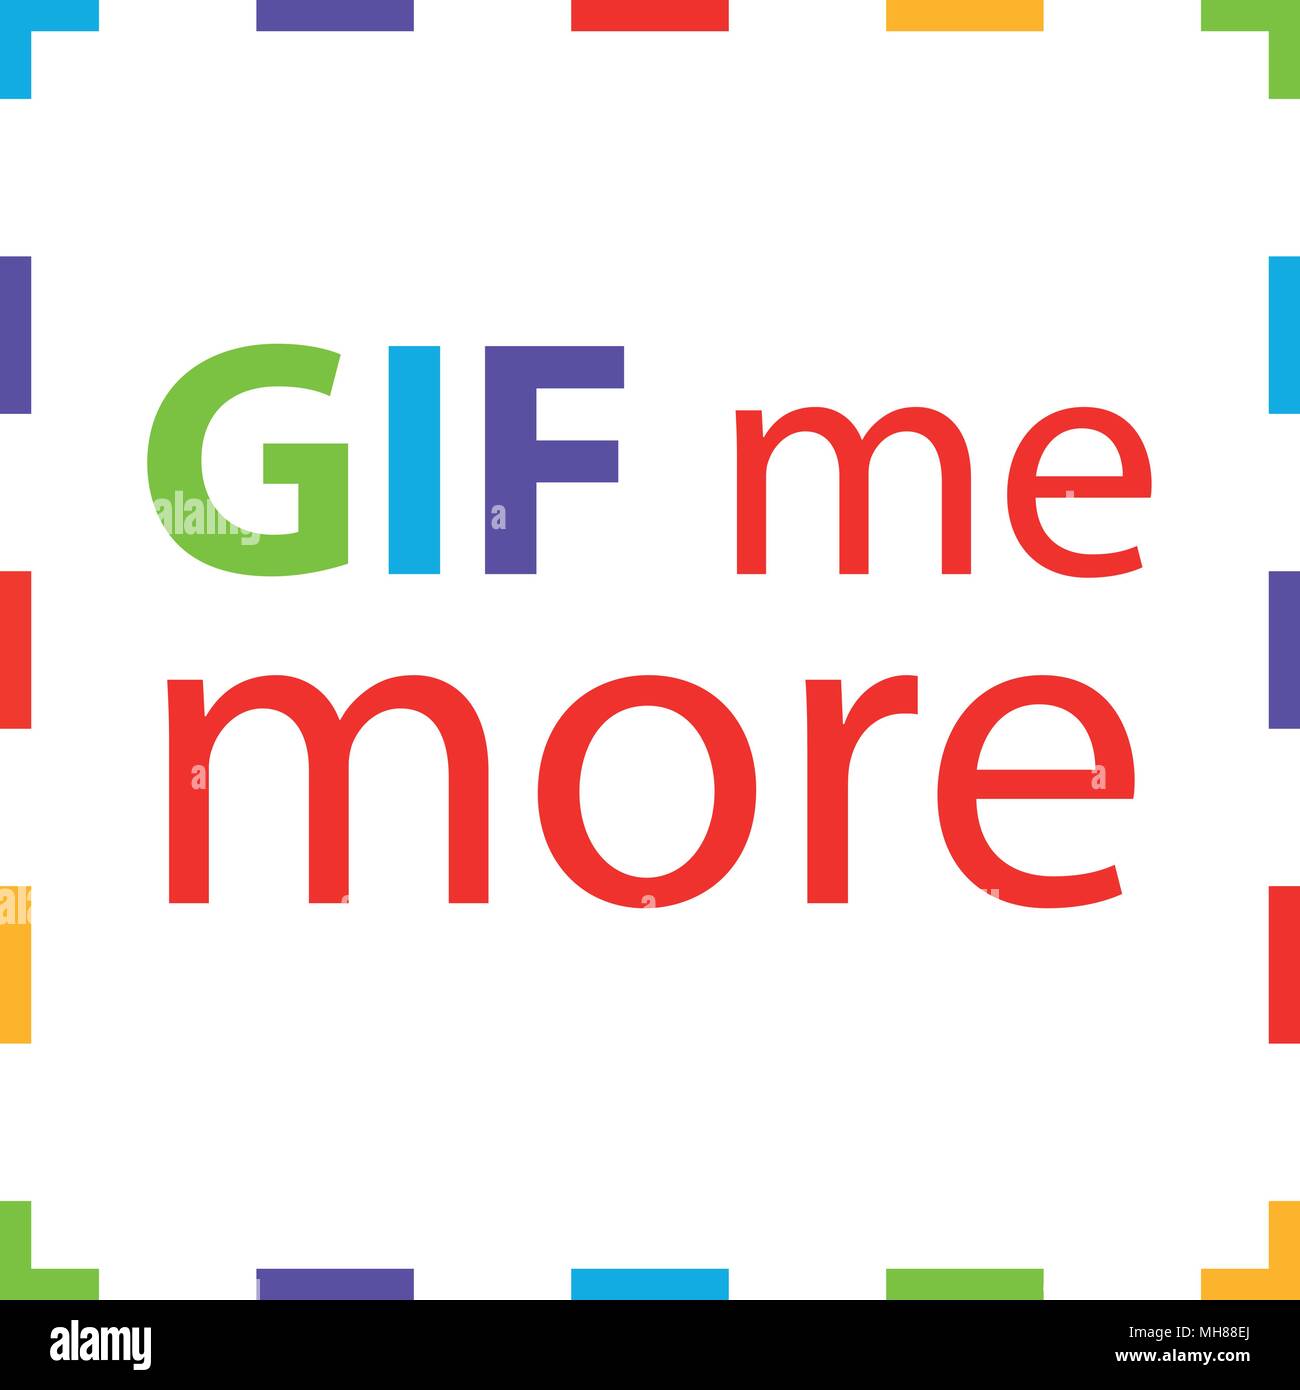 Shirt vector illustration with sentence 'gif me more' Stock Vector